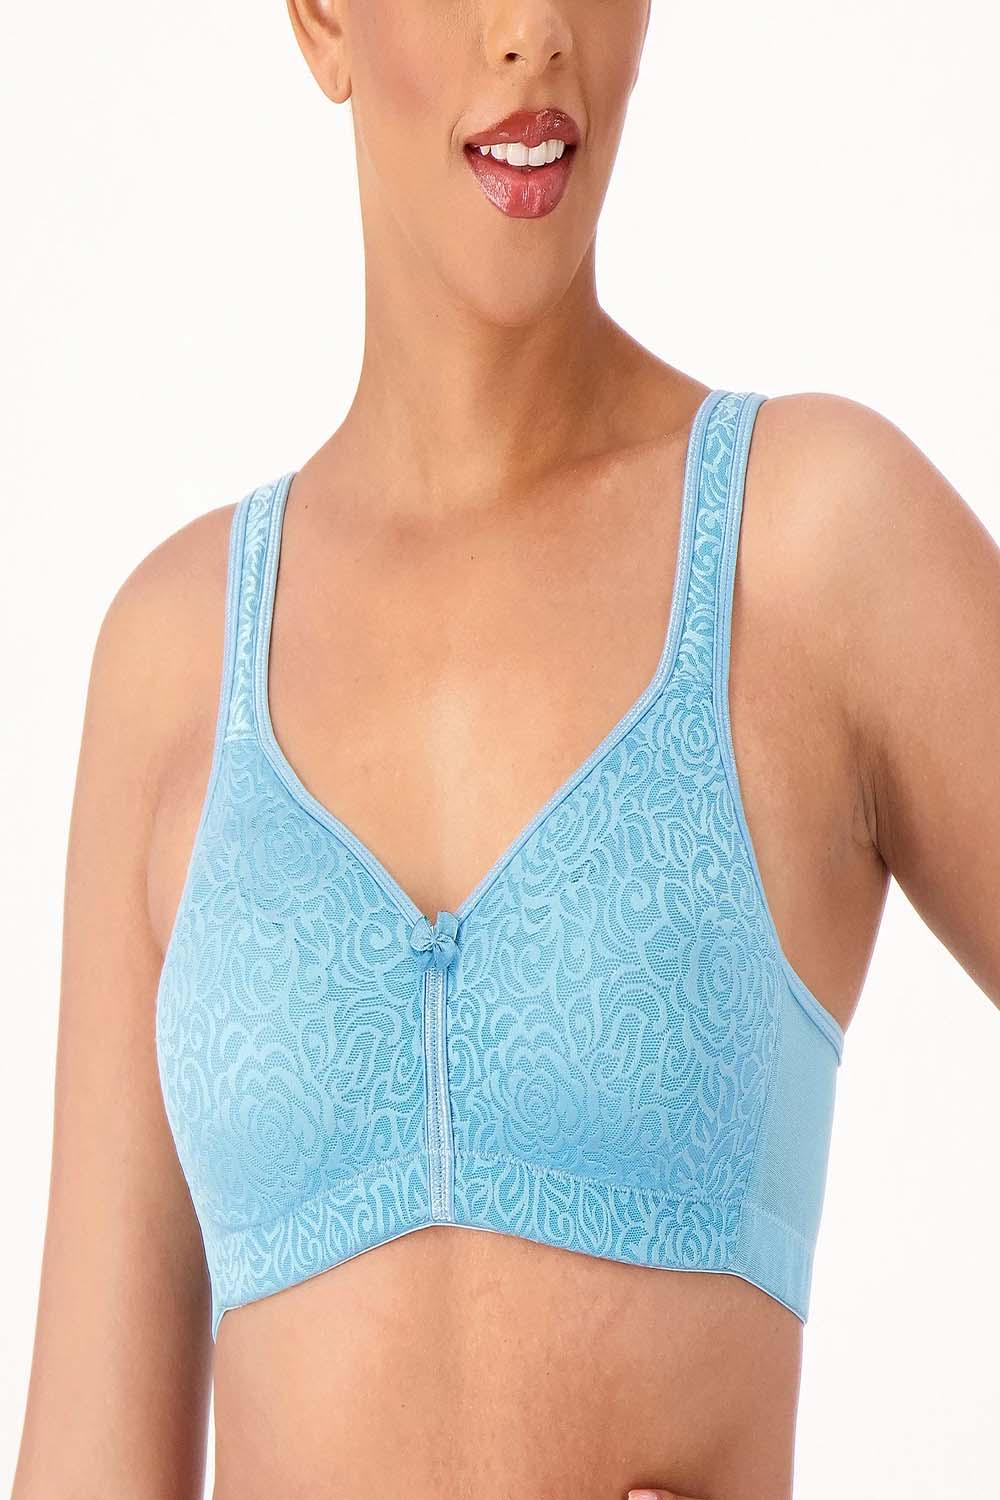 Cuddl Duds Intimates S/2 Seamless Easy Comfort Lounge Bralette